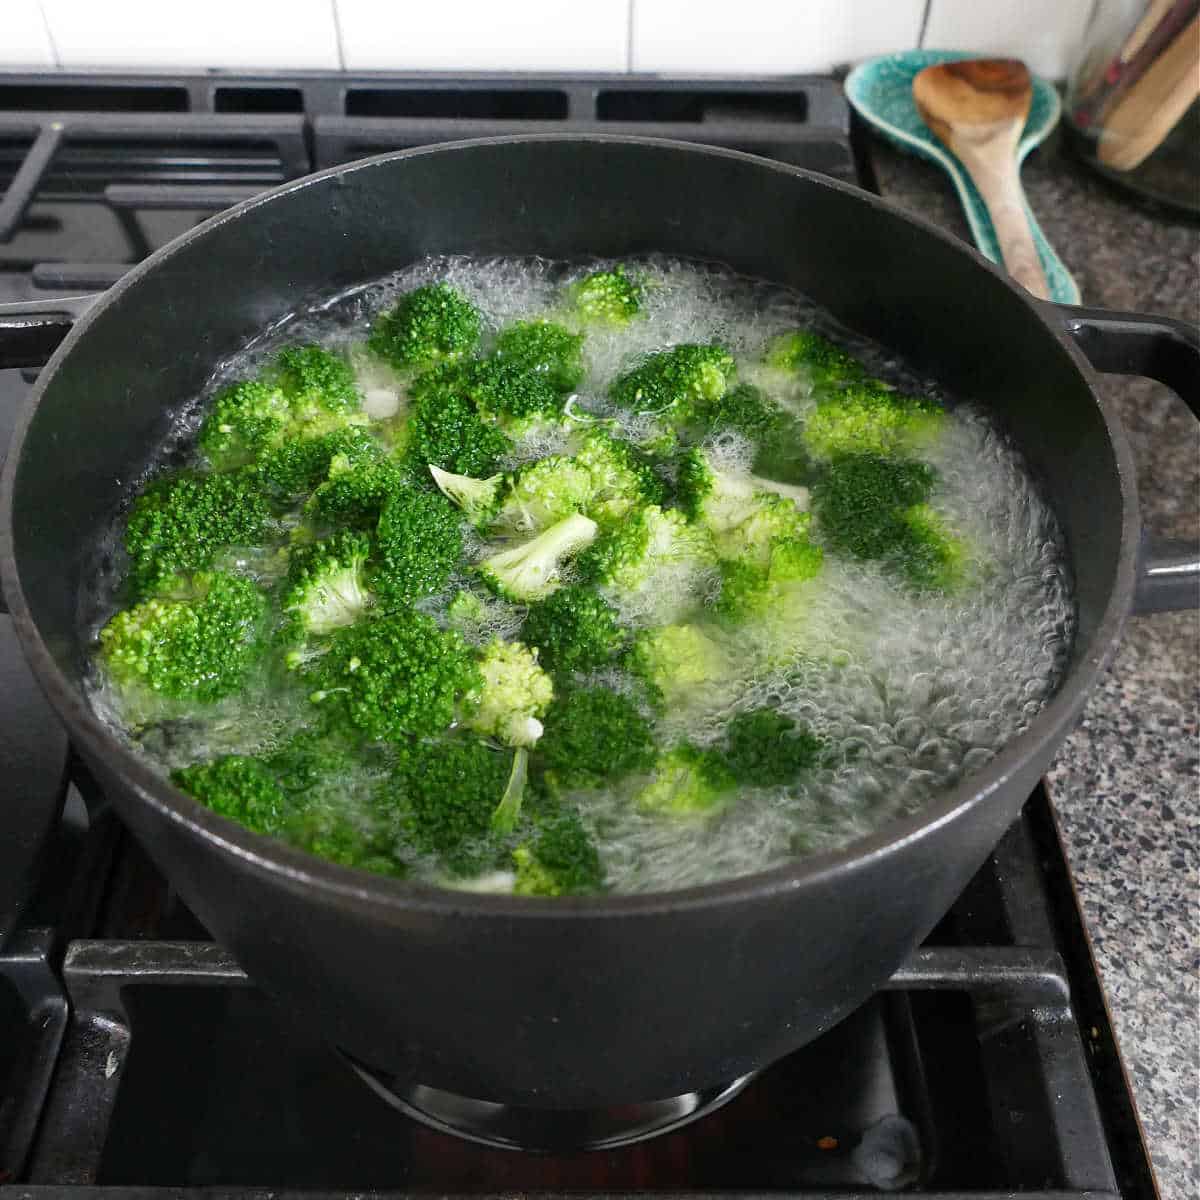 broccoli florets boiling in a pot of water on a stove